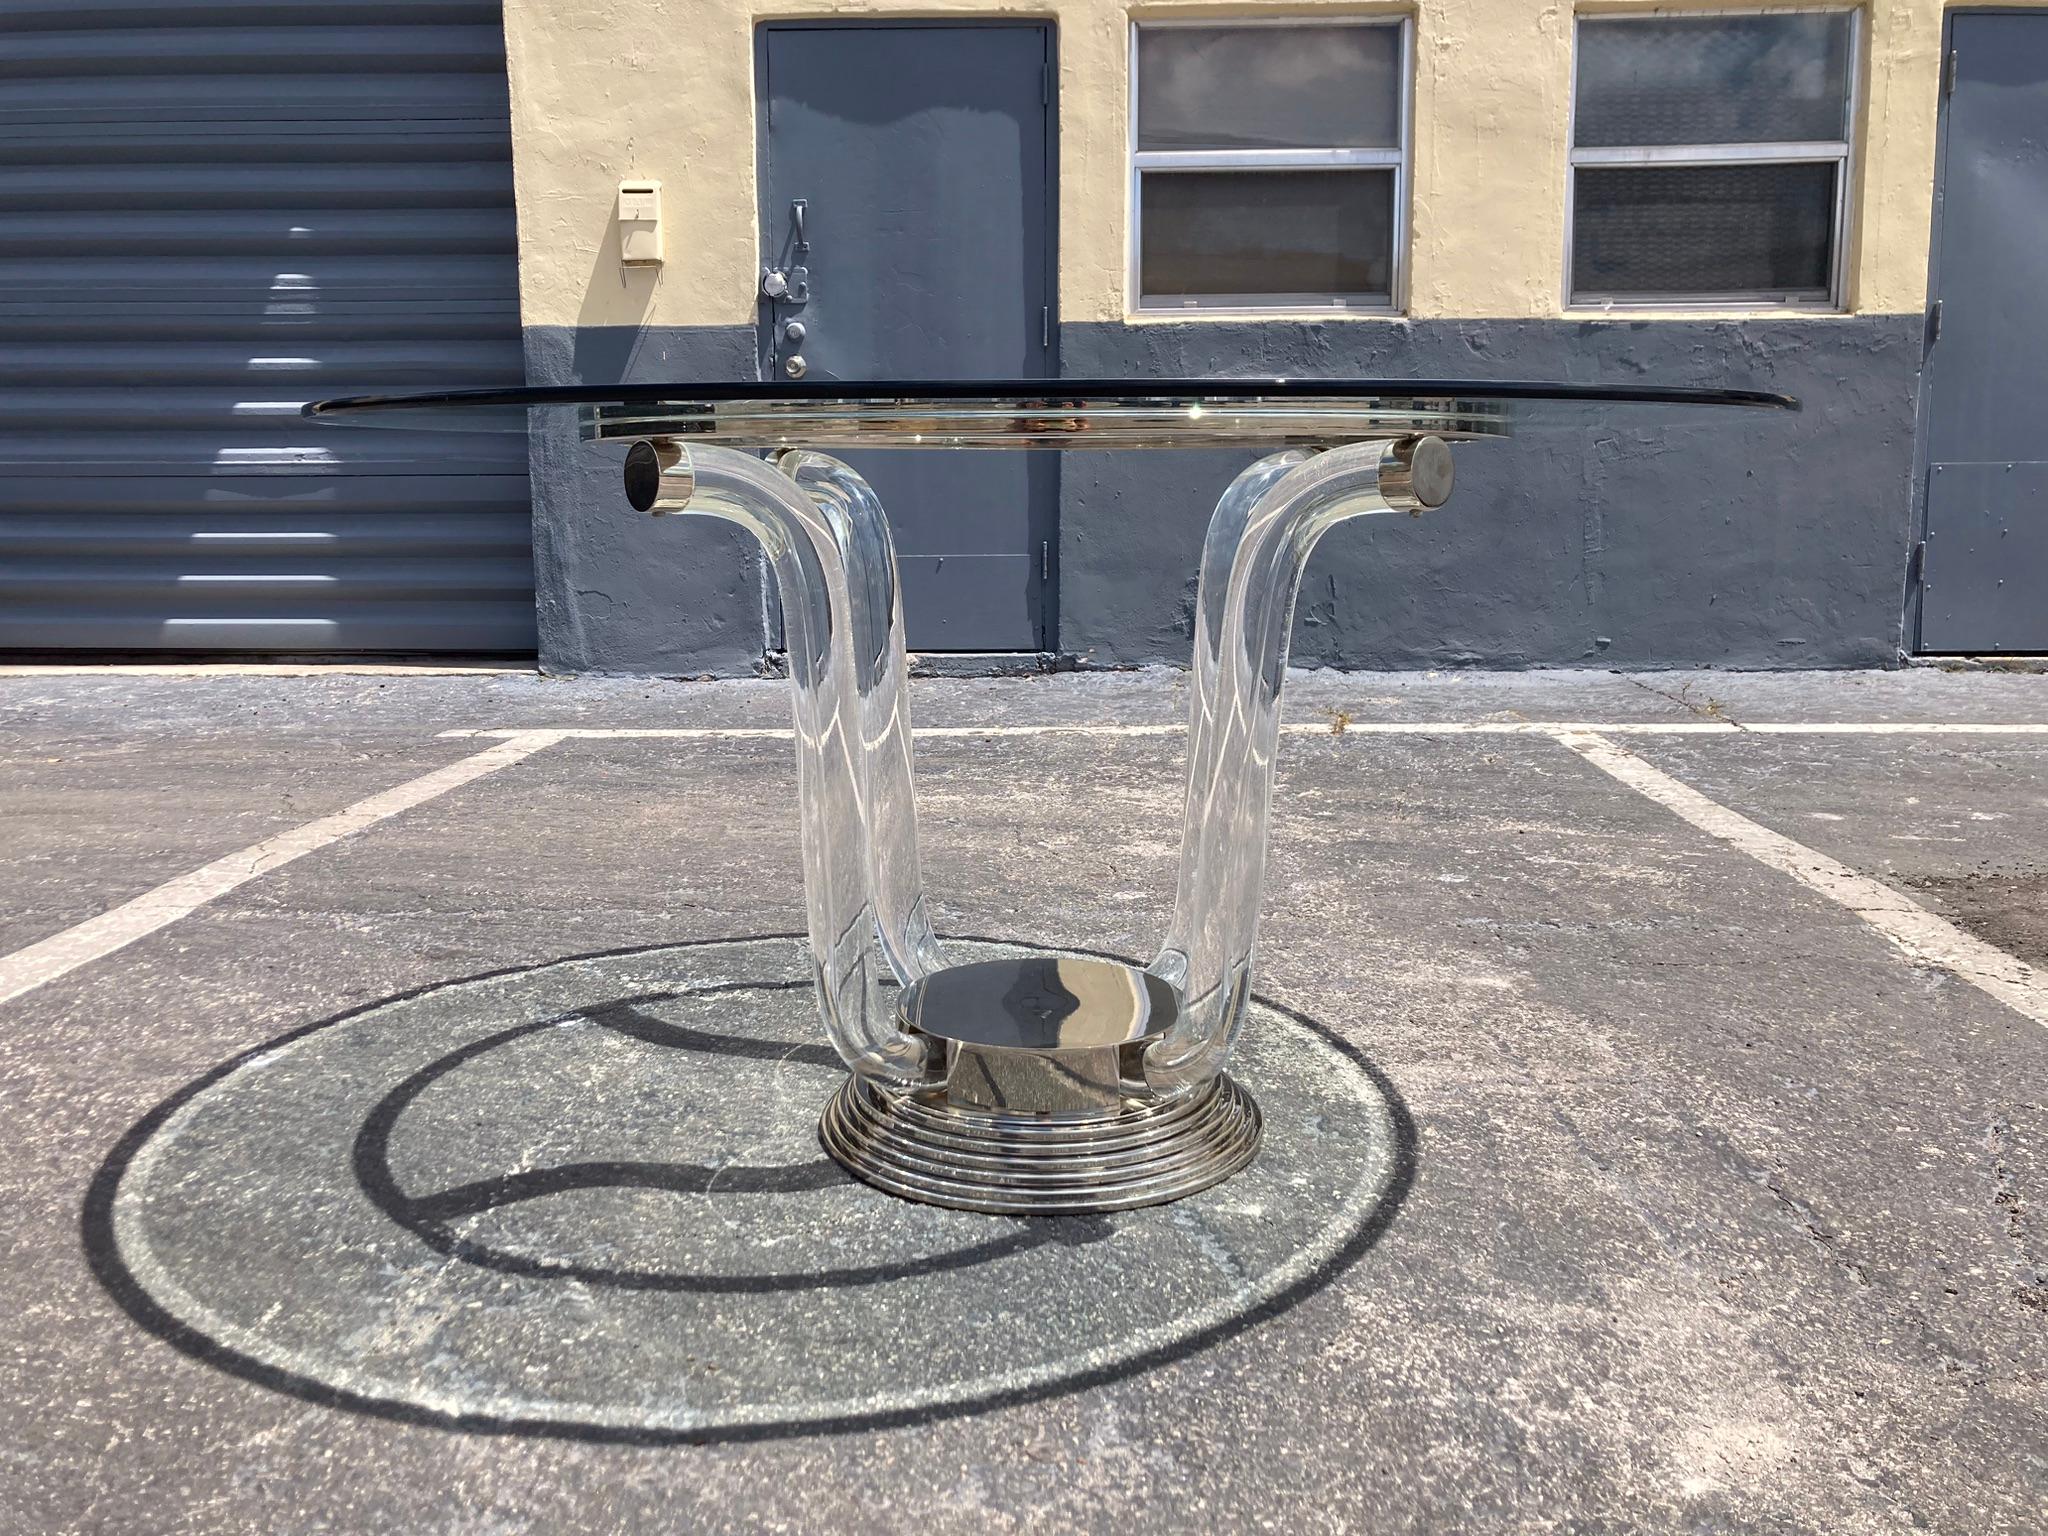 Designer Table from the 70ies. Lucite with Stainless Steel and Nickel plated metal. According to the previous owner bought in France.
The measurements of the base without glass are 35.5” in diameter and 28.75 high.